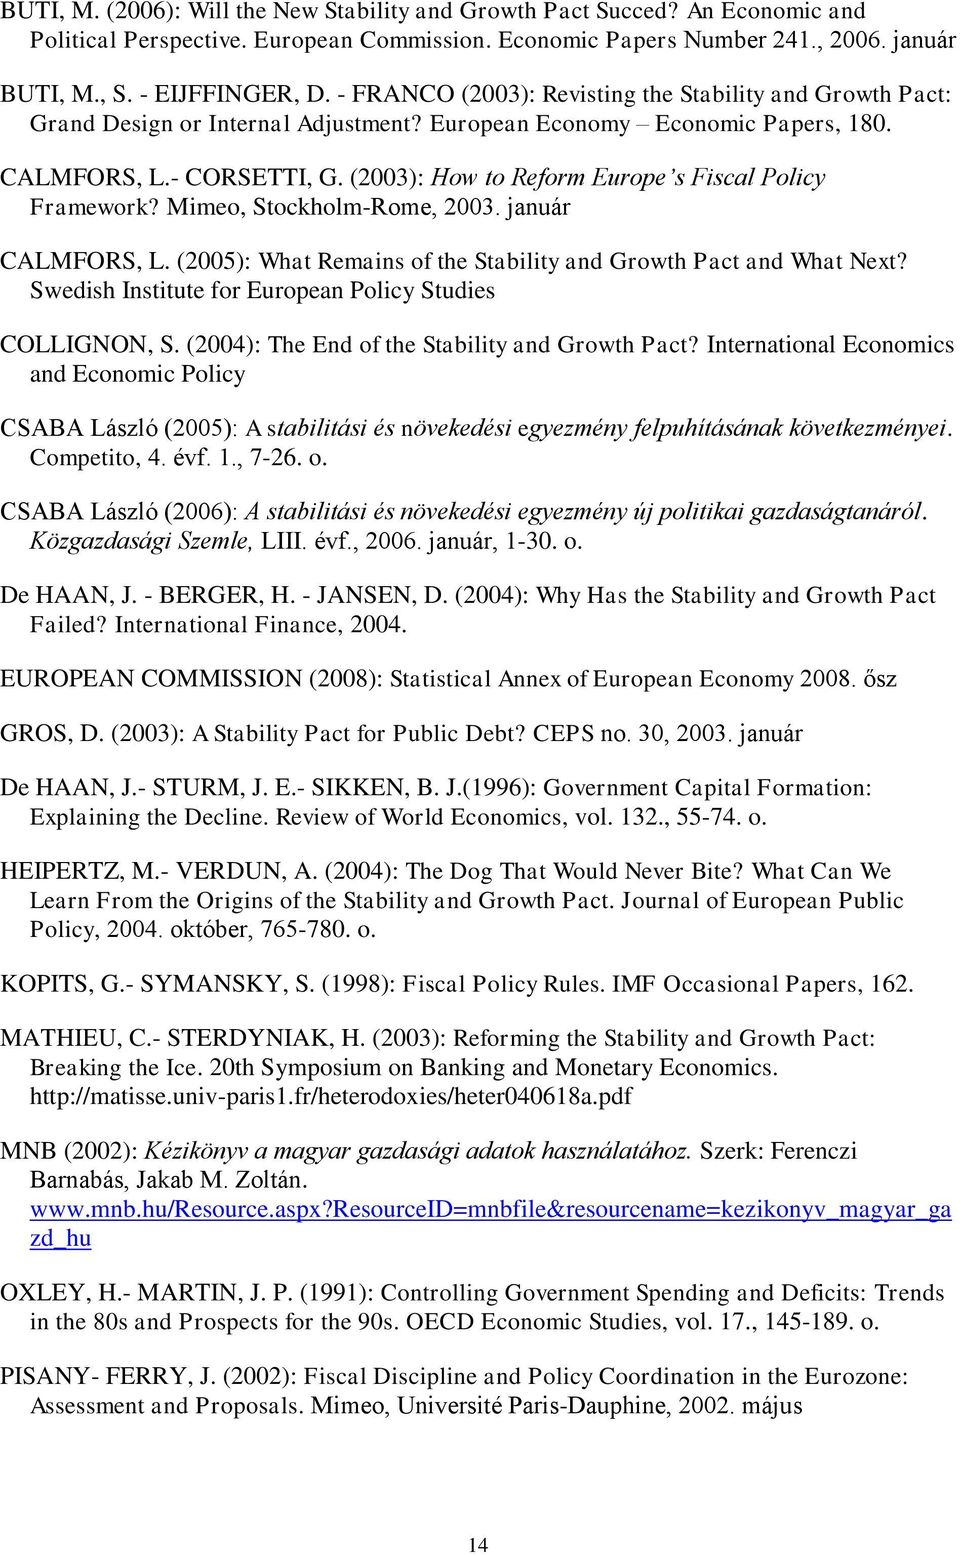 (2003): How to Reform Europe s Fiscal Policy Framework? Mimeo, Stockholm-Rome, 2003. január CALMFORS, L. (2005): What Remains of the Stability and Growth Pact and What Next?